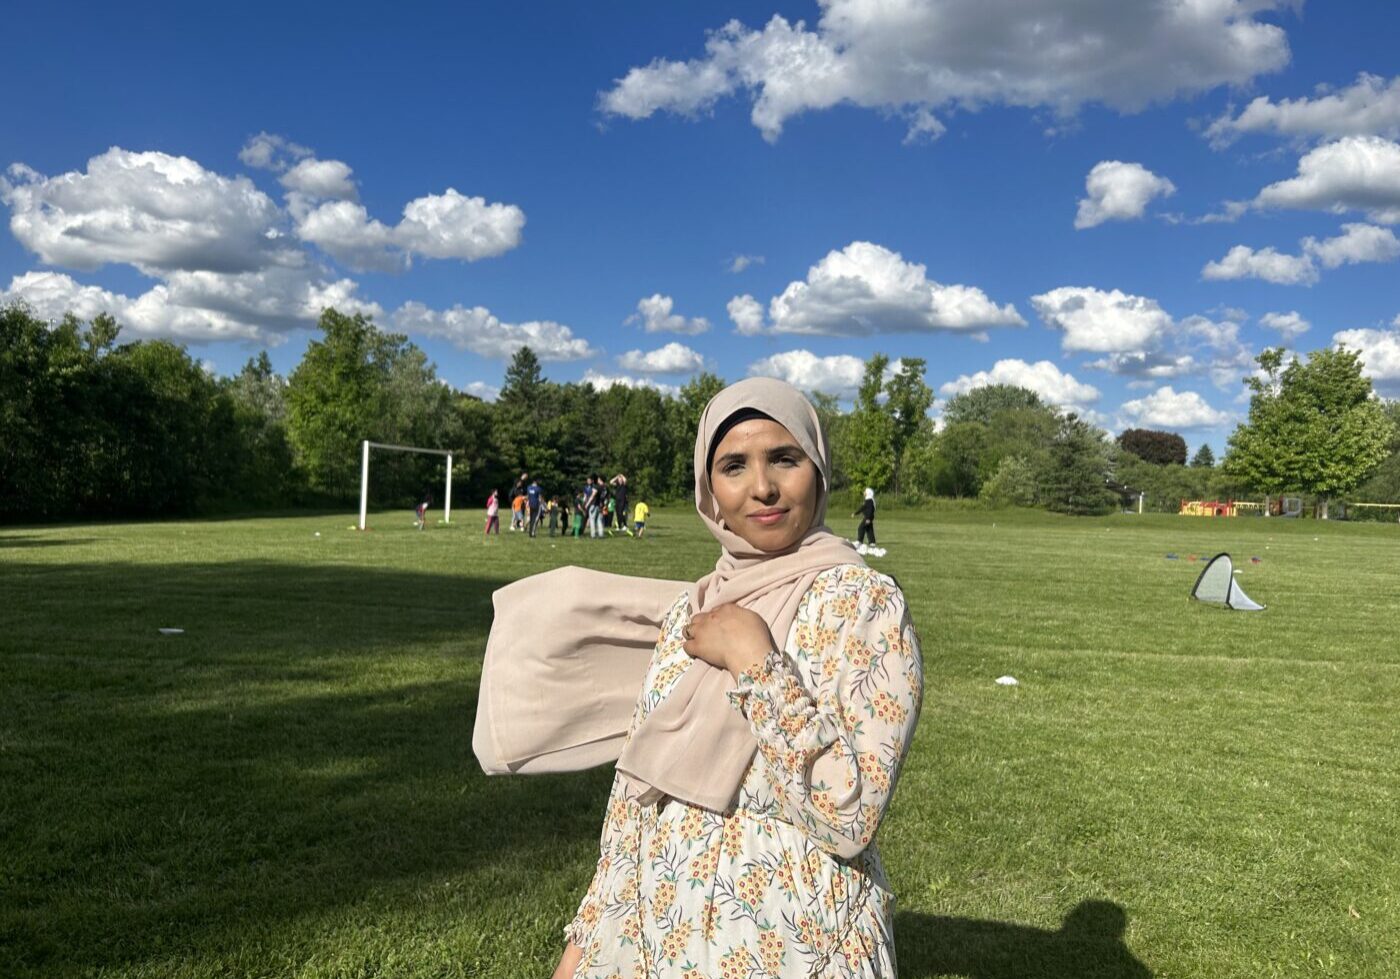 Mariam Omayan, Aljawabrih’s mom, stands in the soccer field at Terraview Park.